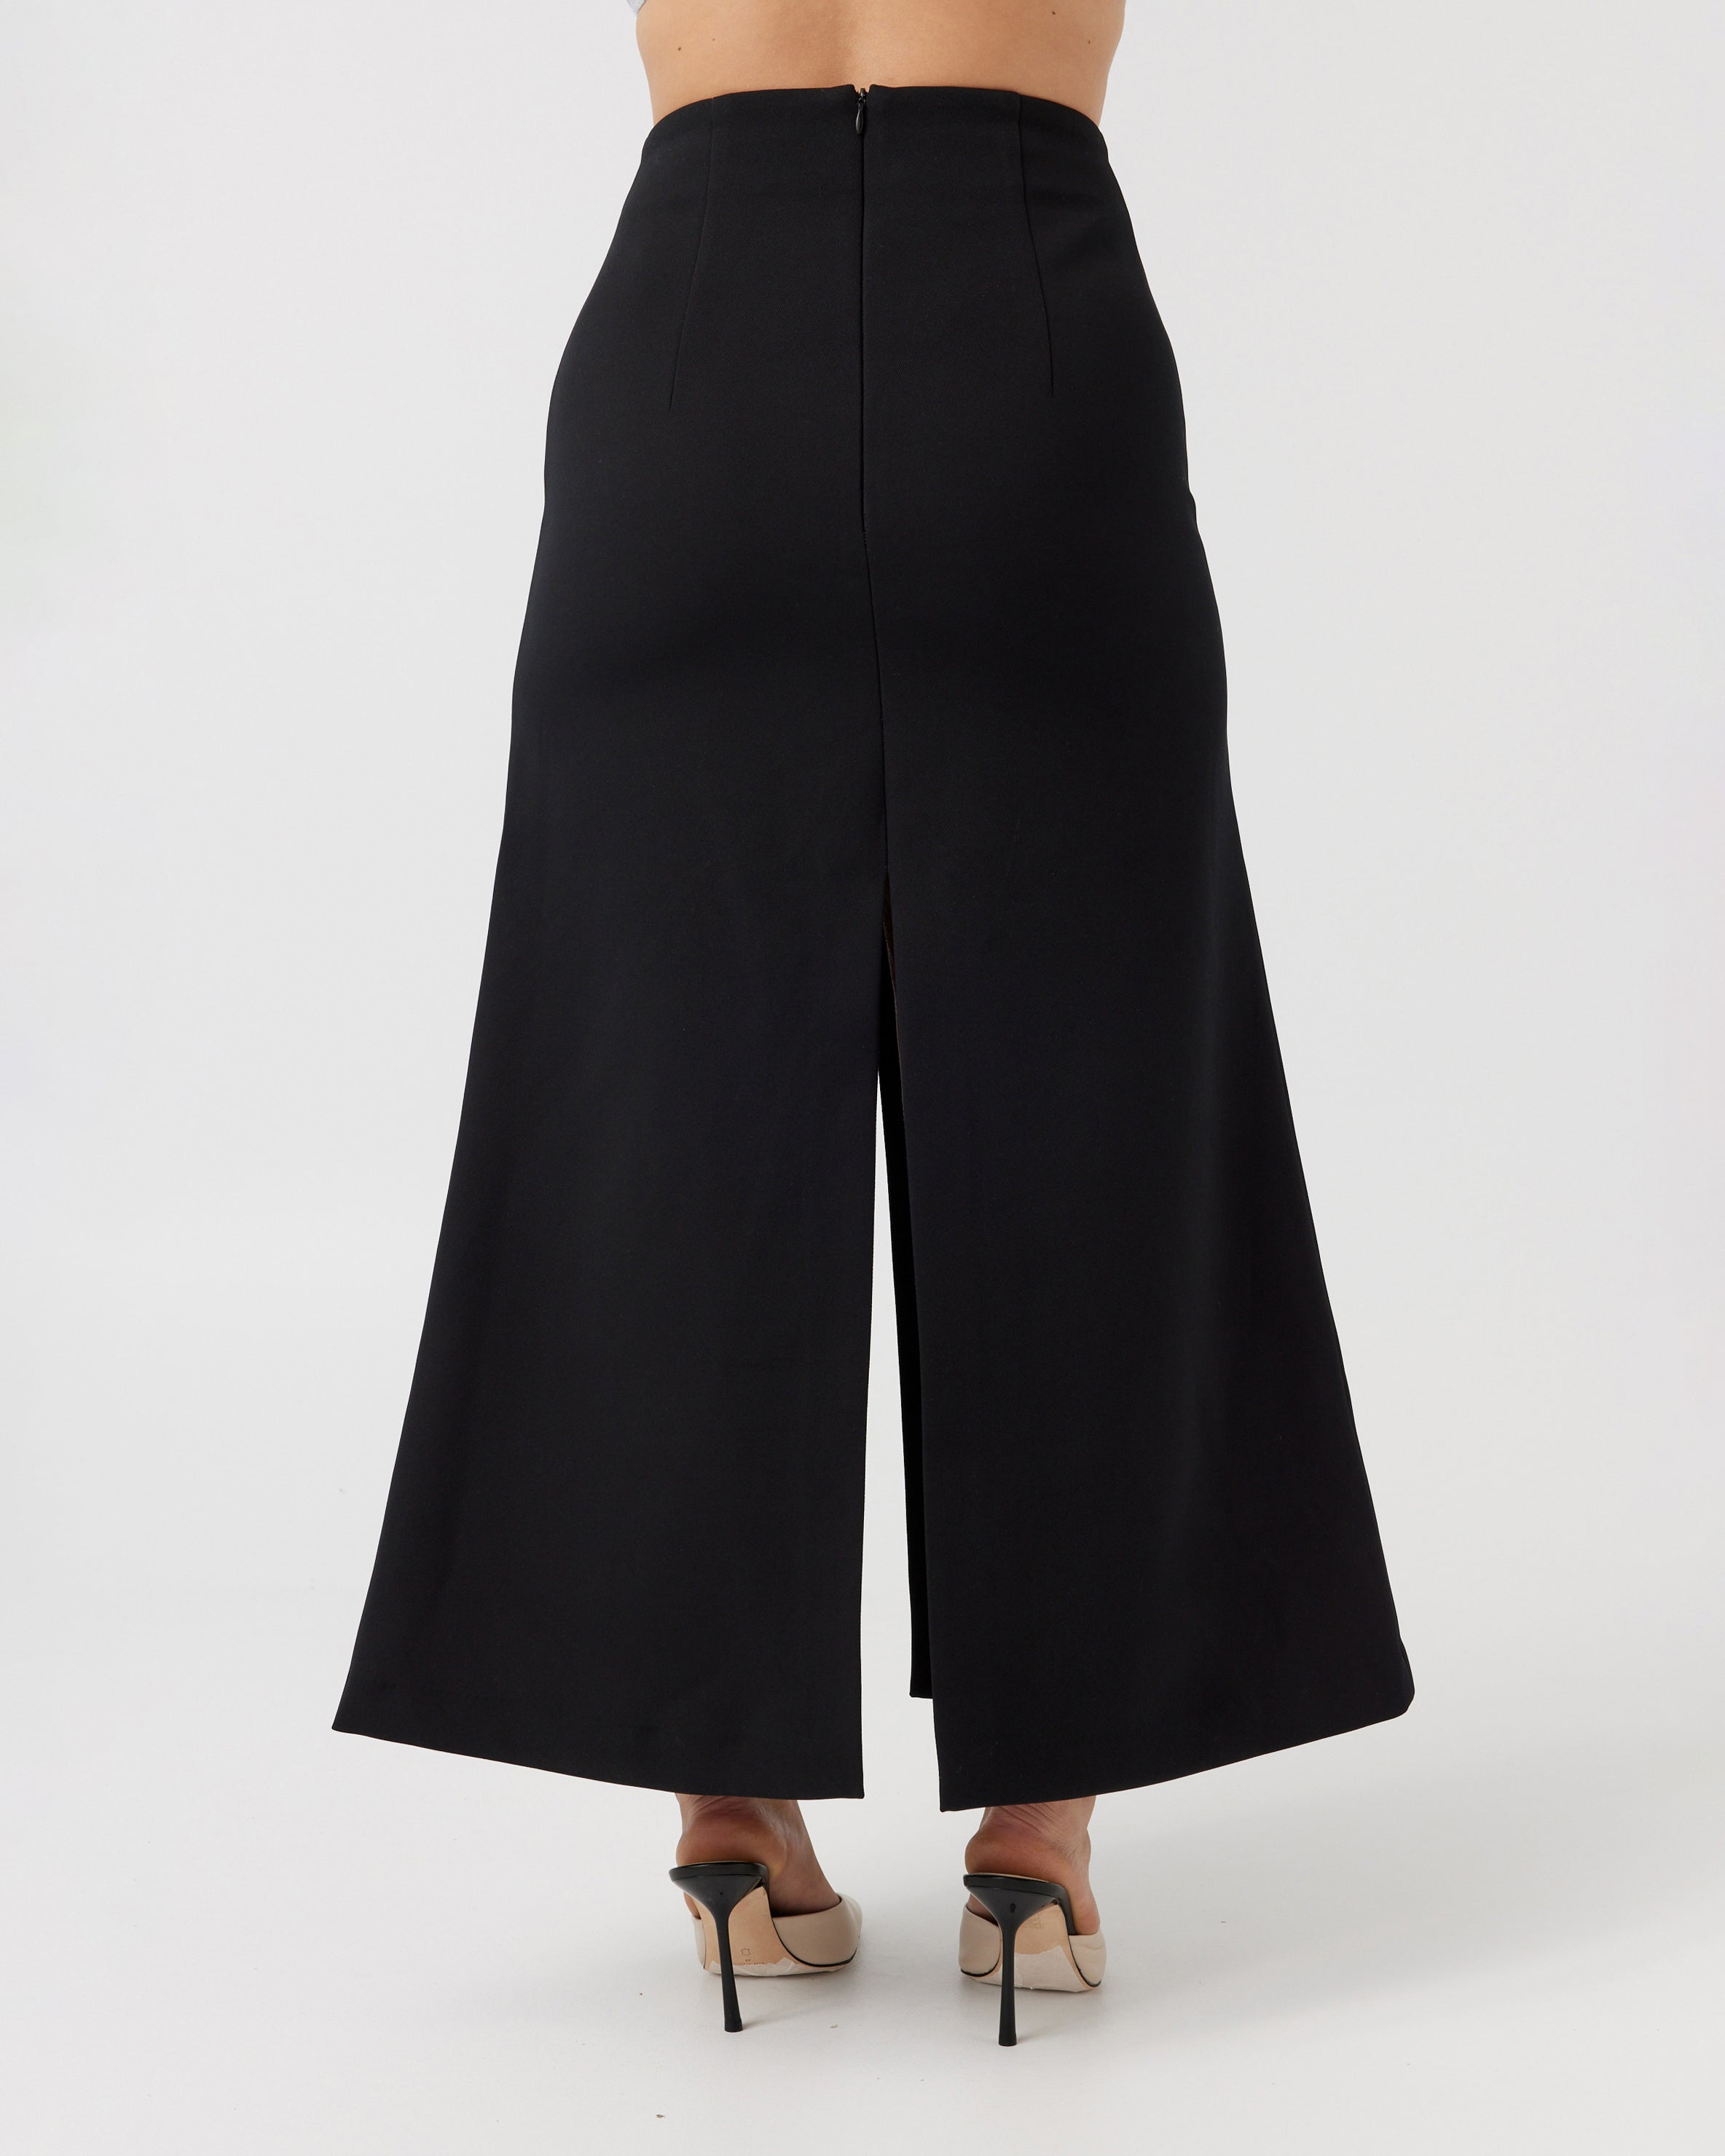 Woman with a curvaceous figure wearing a high-waisted maxi length black skirt with middle split.